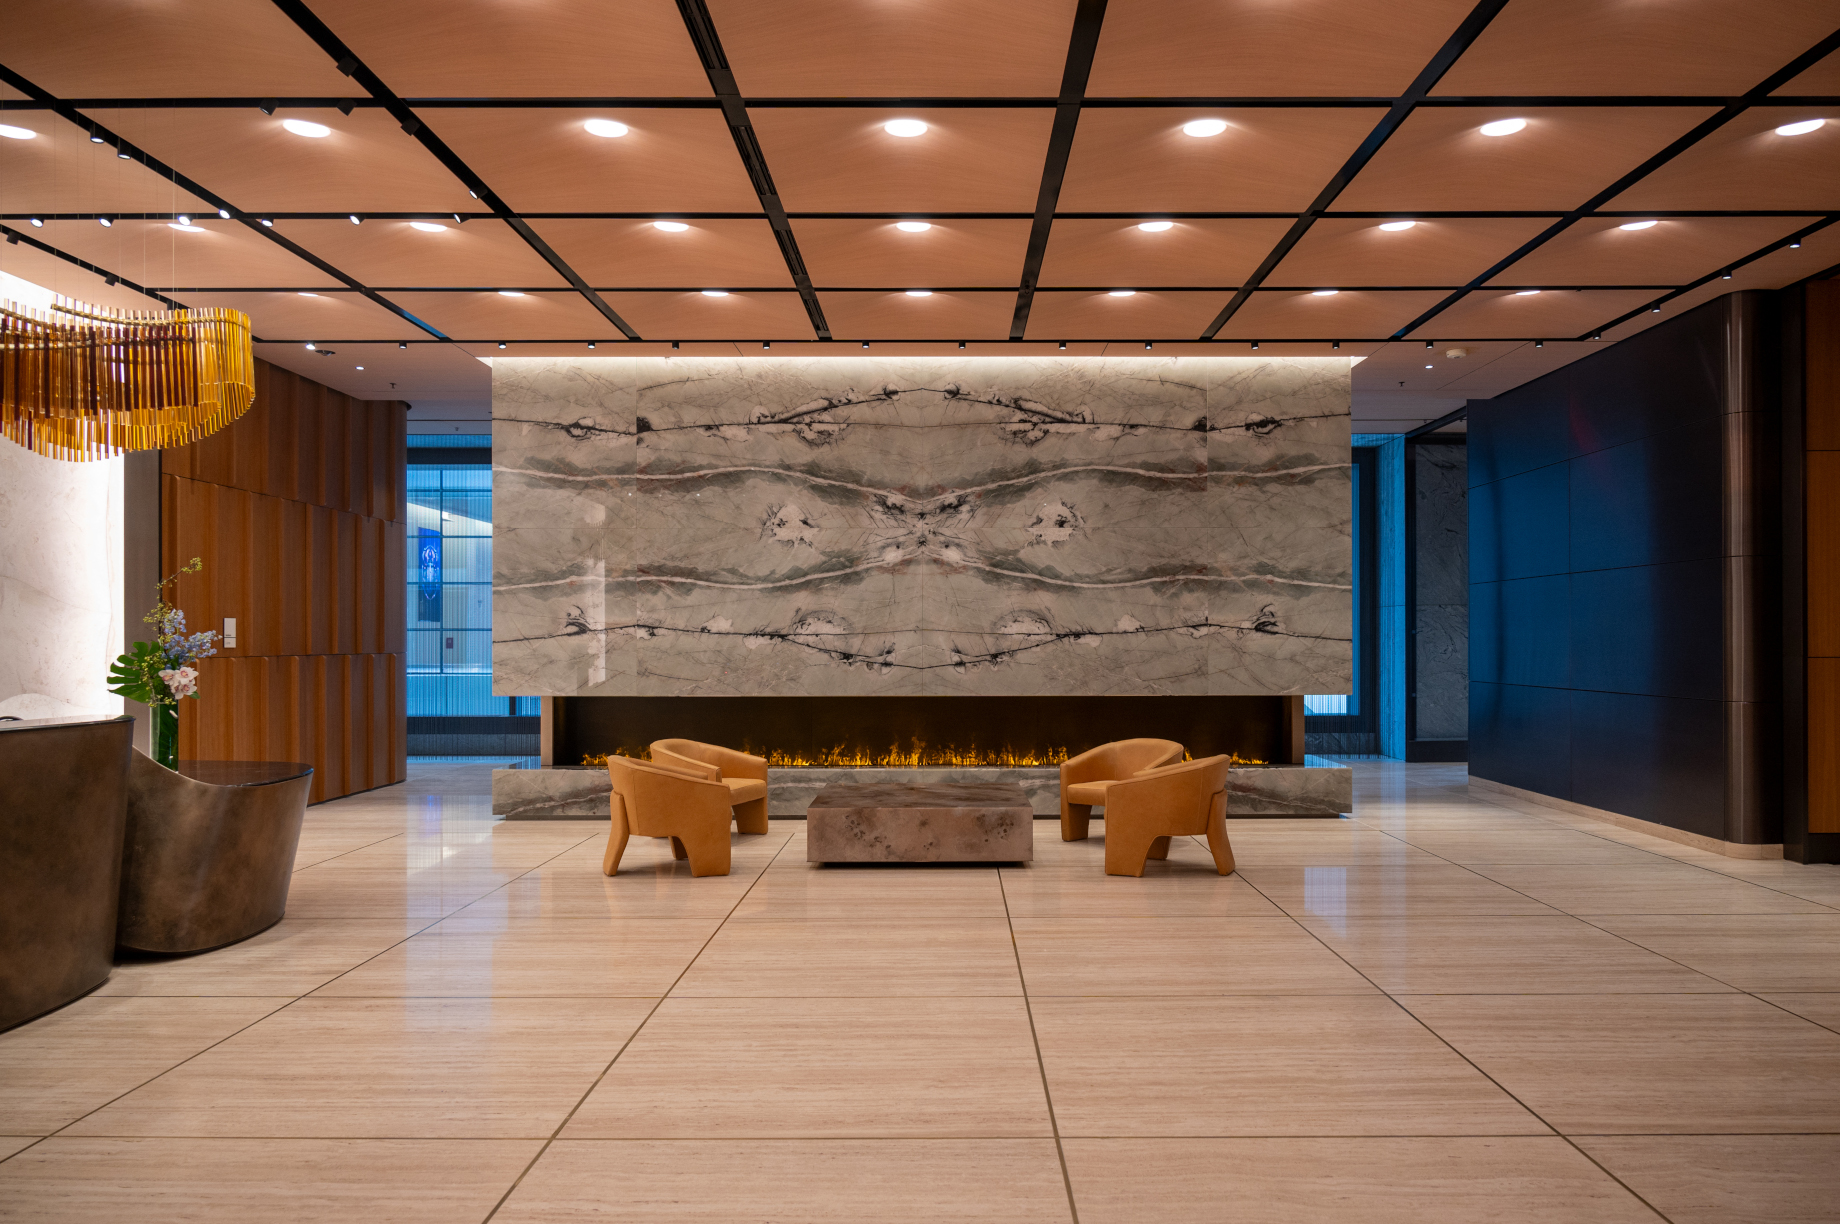 Wood fabric ceiling by Richter for the 50 Hudson Yards